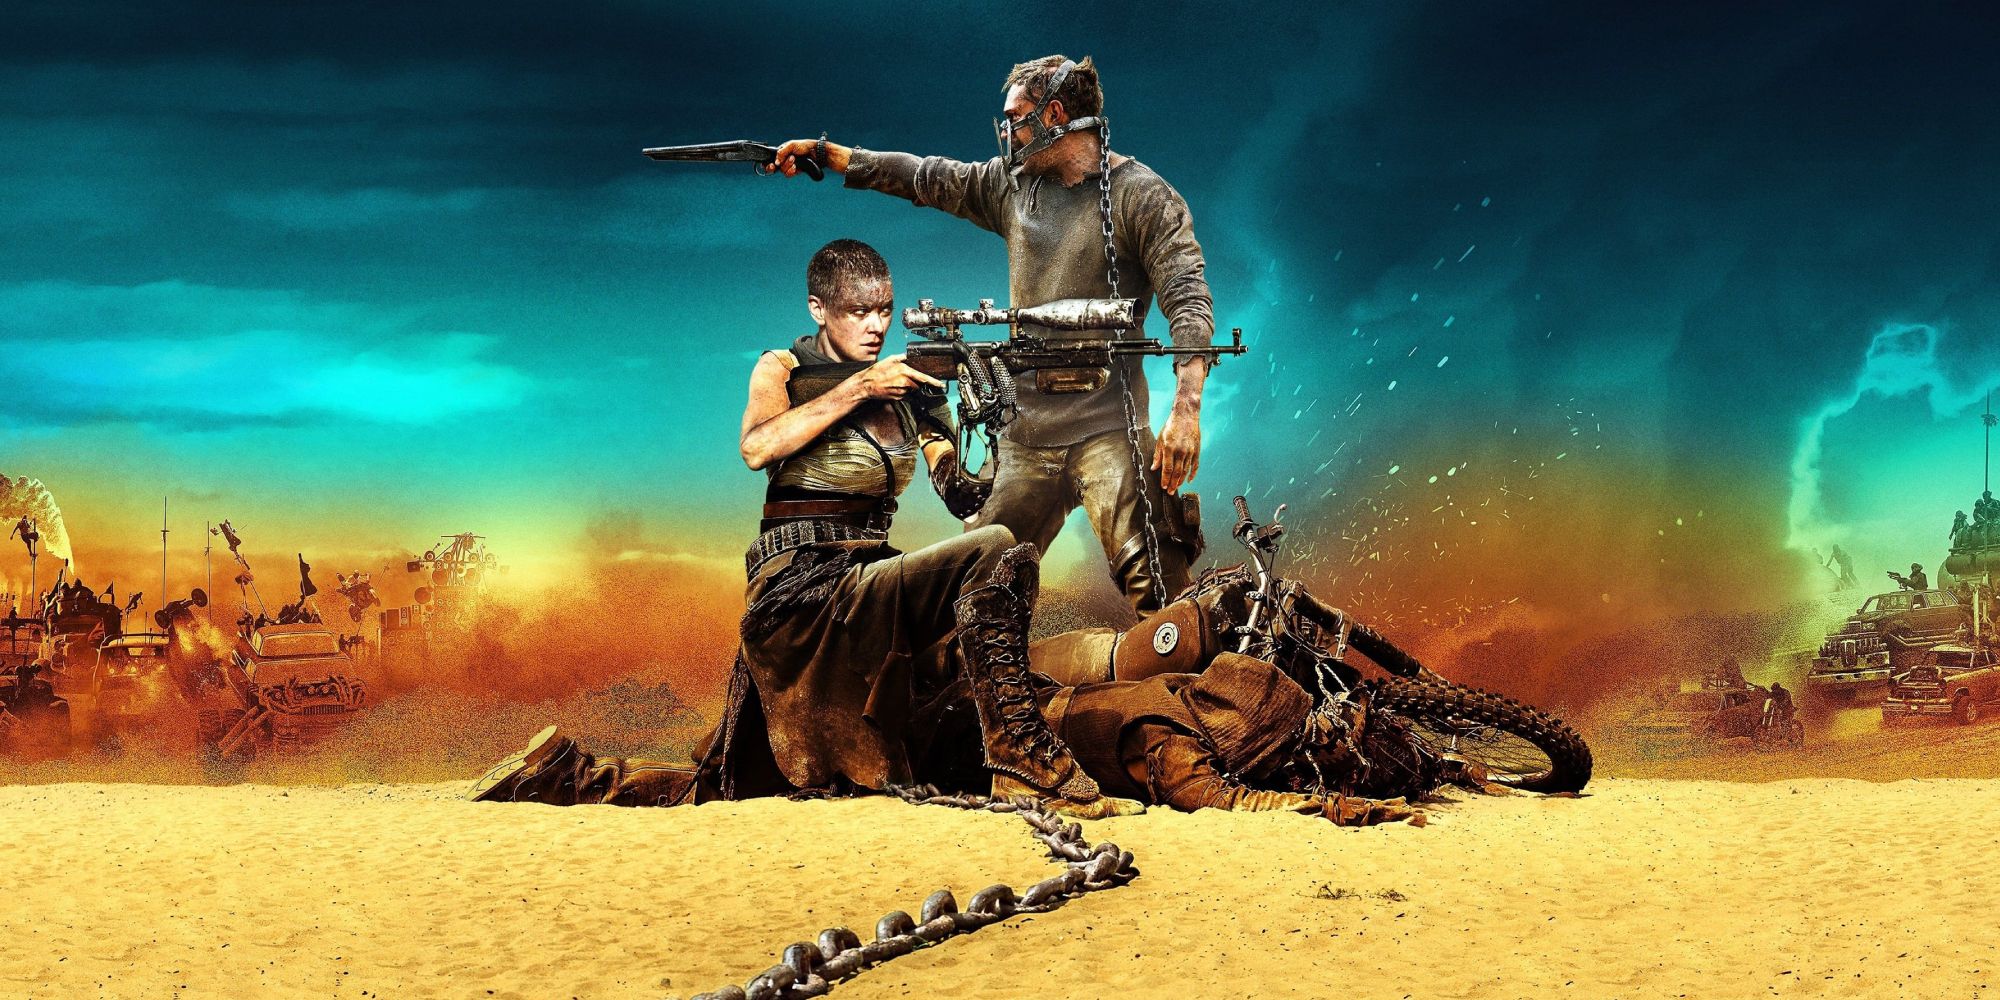 Max aand Furiosa pointing guns in opposite directions in the 'Mad Max: Fury Road' Poster